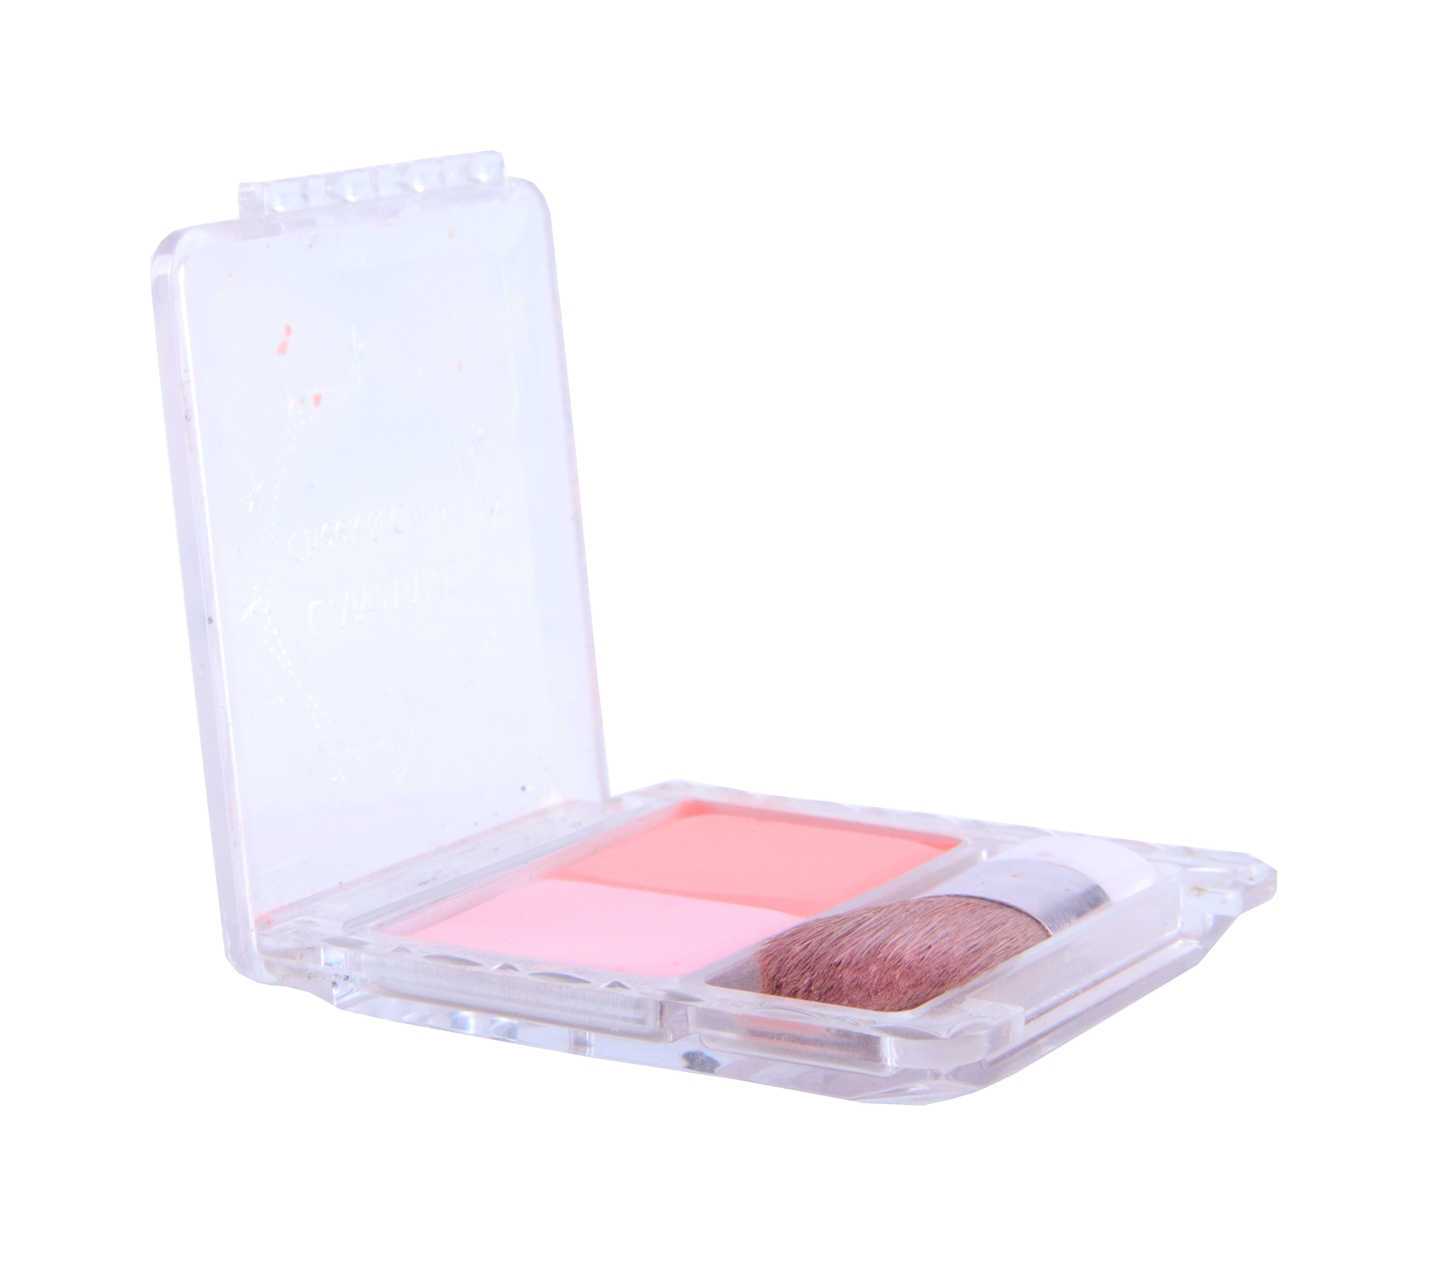 Canmake Cheek & Cheek 01 Candy Flowers Blush Duo Faces